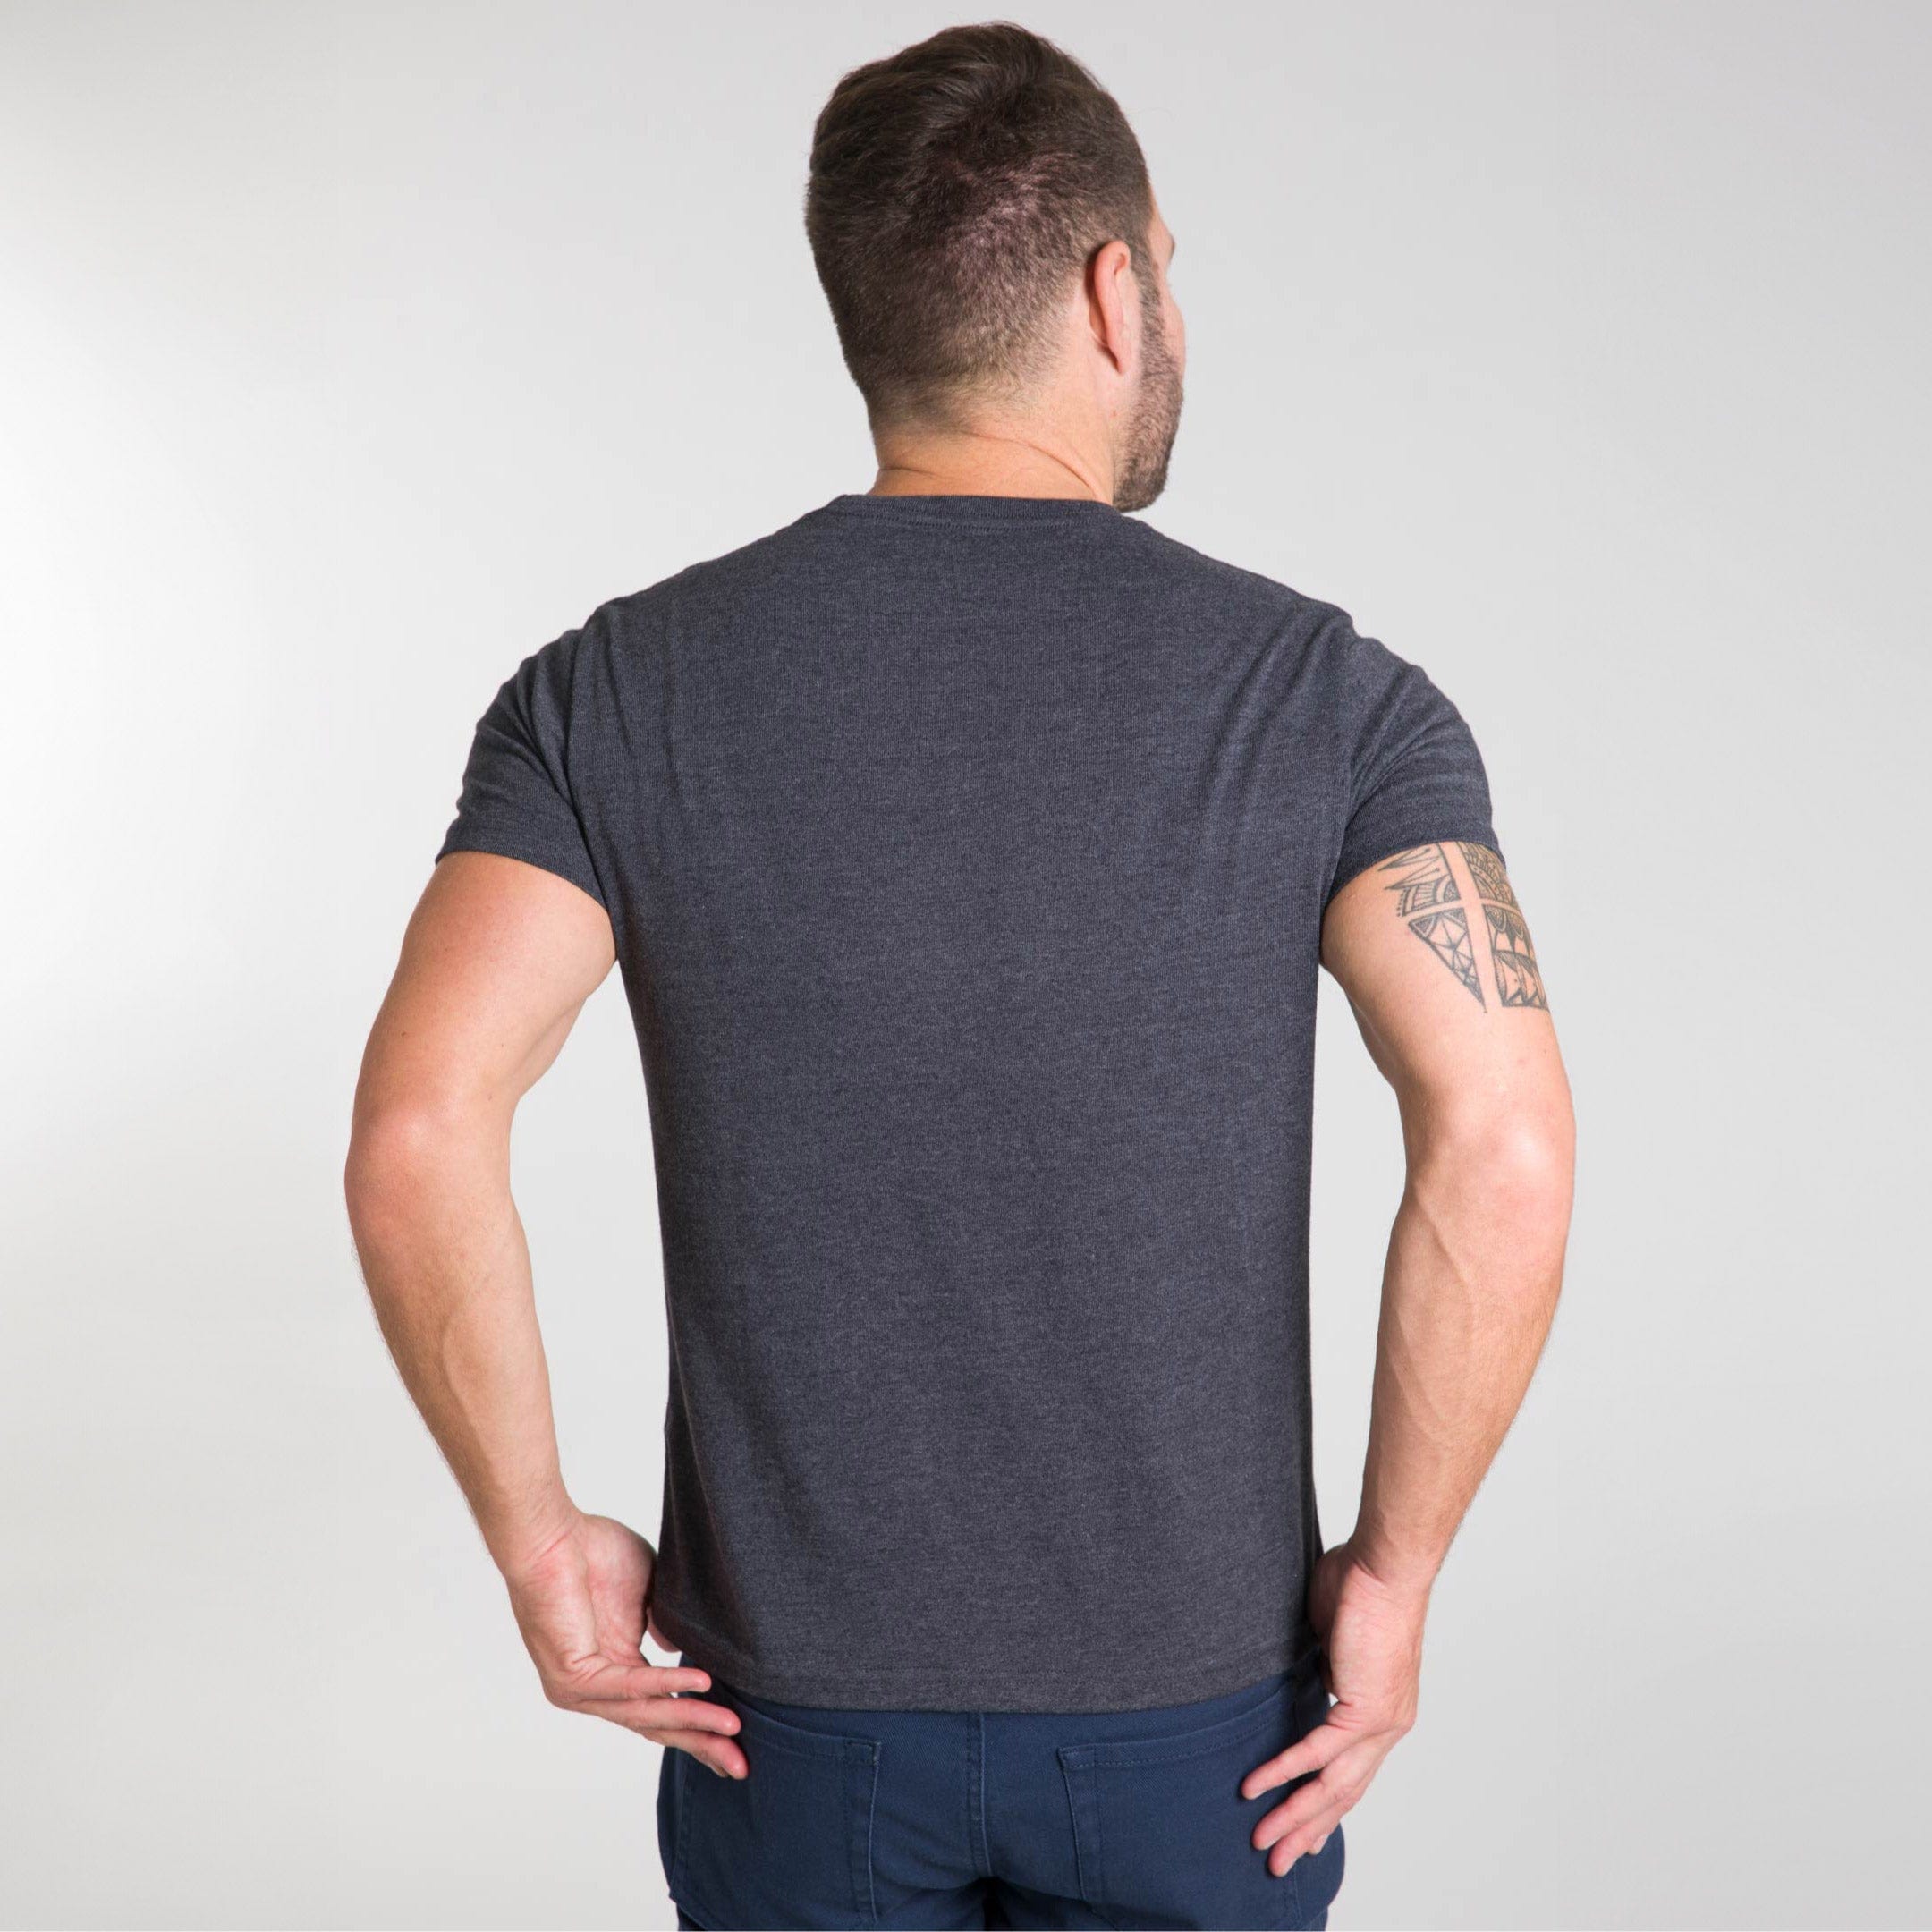 Ash & Erie Heather Charcoal Crew Neck T-Shirt for Short Men Heather Charcoal / XS